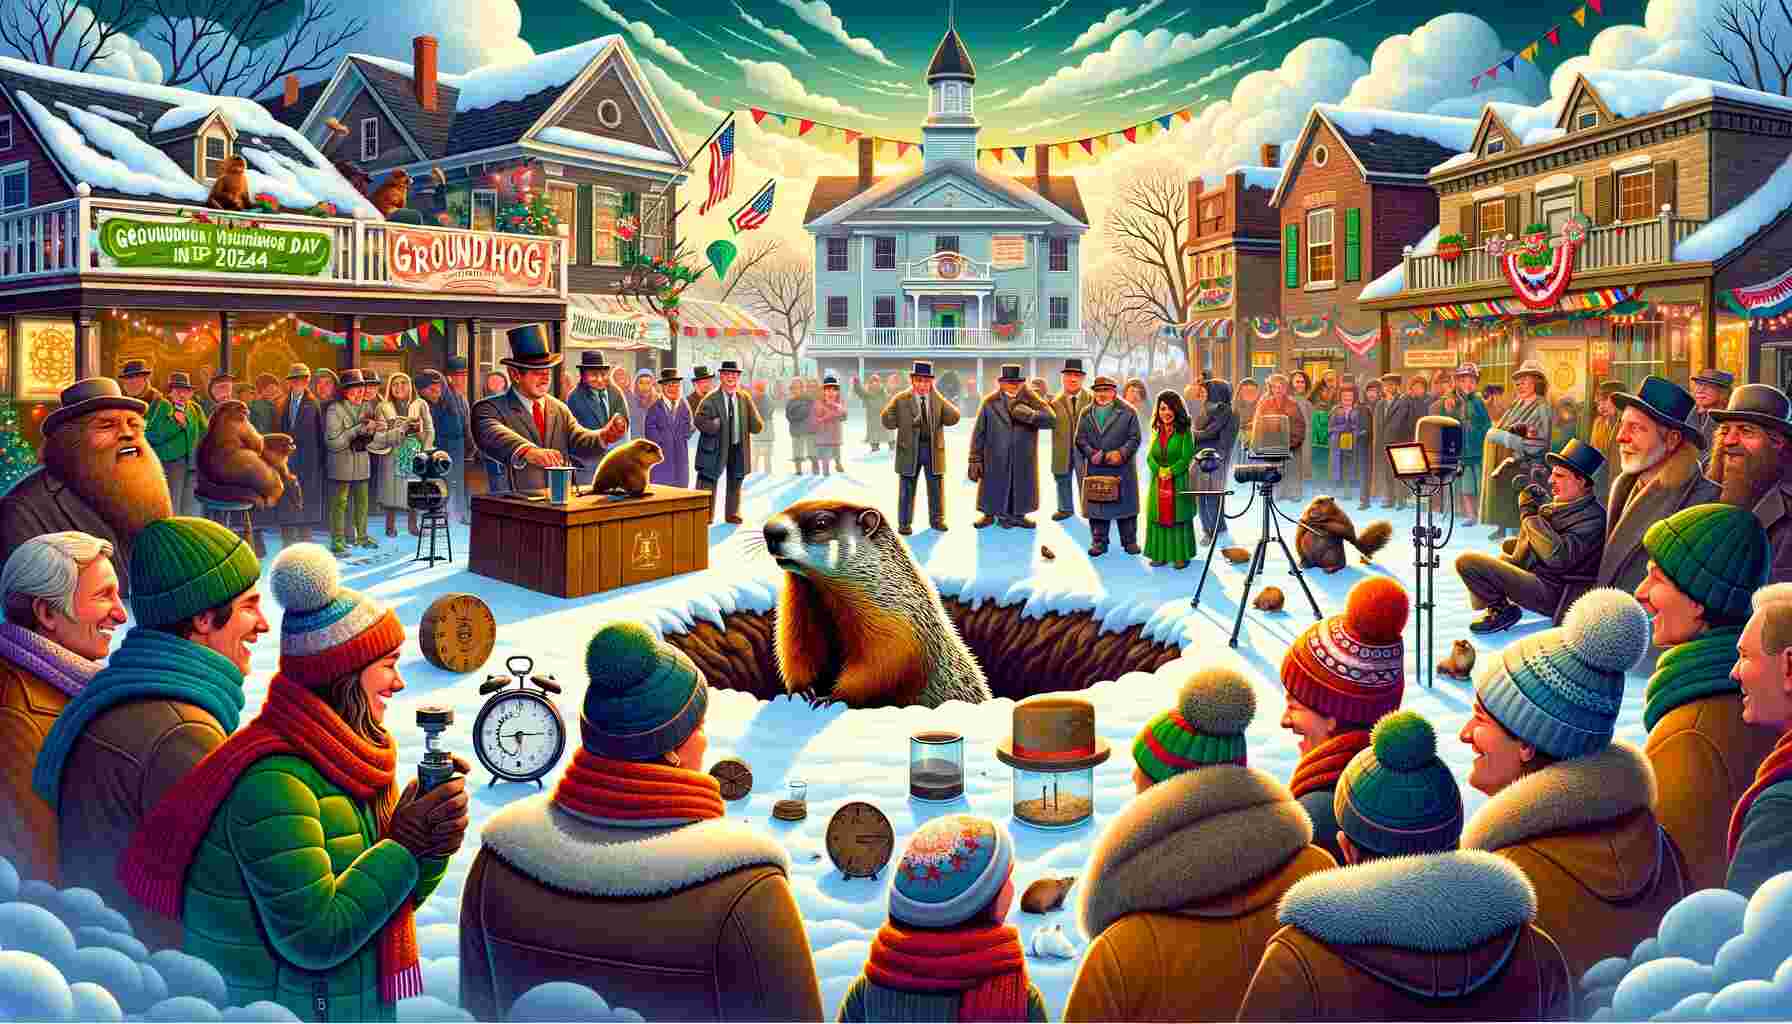 An illustration for Groundhog Day 2024 showing a small-town setting in early morning. At the center, a groundhog emerges from its burrow, surrounded by a diverse crowd in winter attire, eagerly anticipating its shadow prediction. Festive banners and decorations celebrating Groundhog Day adorn the scene, blending traditional and modern elements. In the background, scientists with weather instruments and laptops monitor the event, adding a scientific dimension. The partially cloudy sky adds suspense to the scene. The mood is cheerful and anticipatory, embodying the spirit of Groundhog Day.